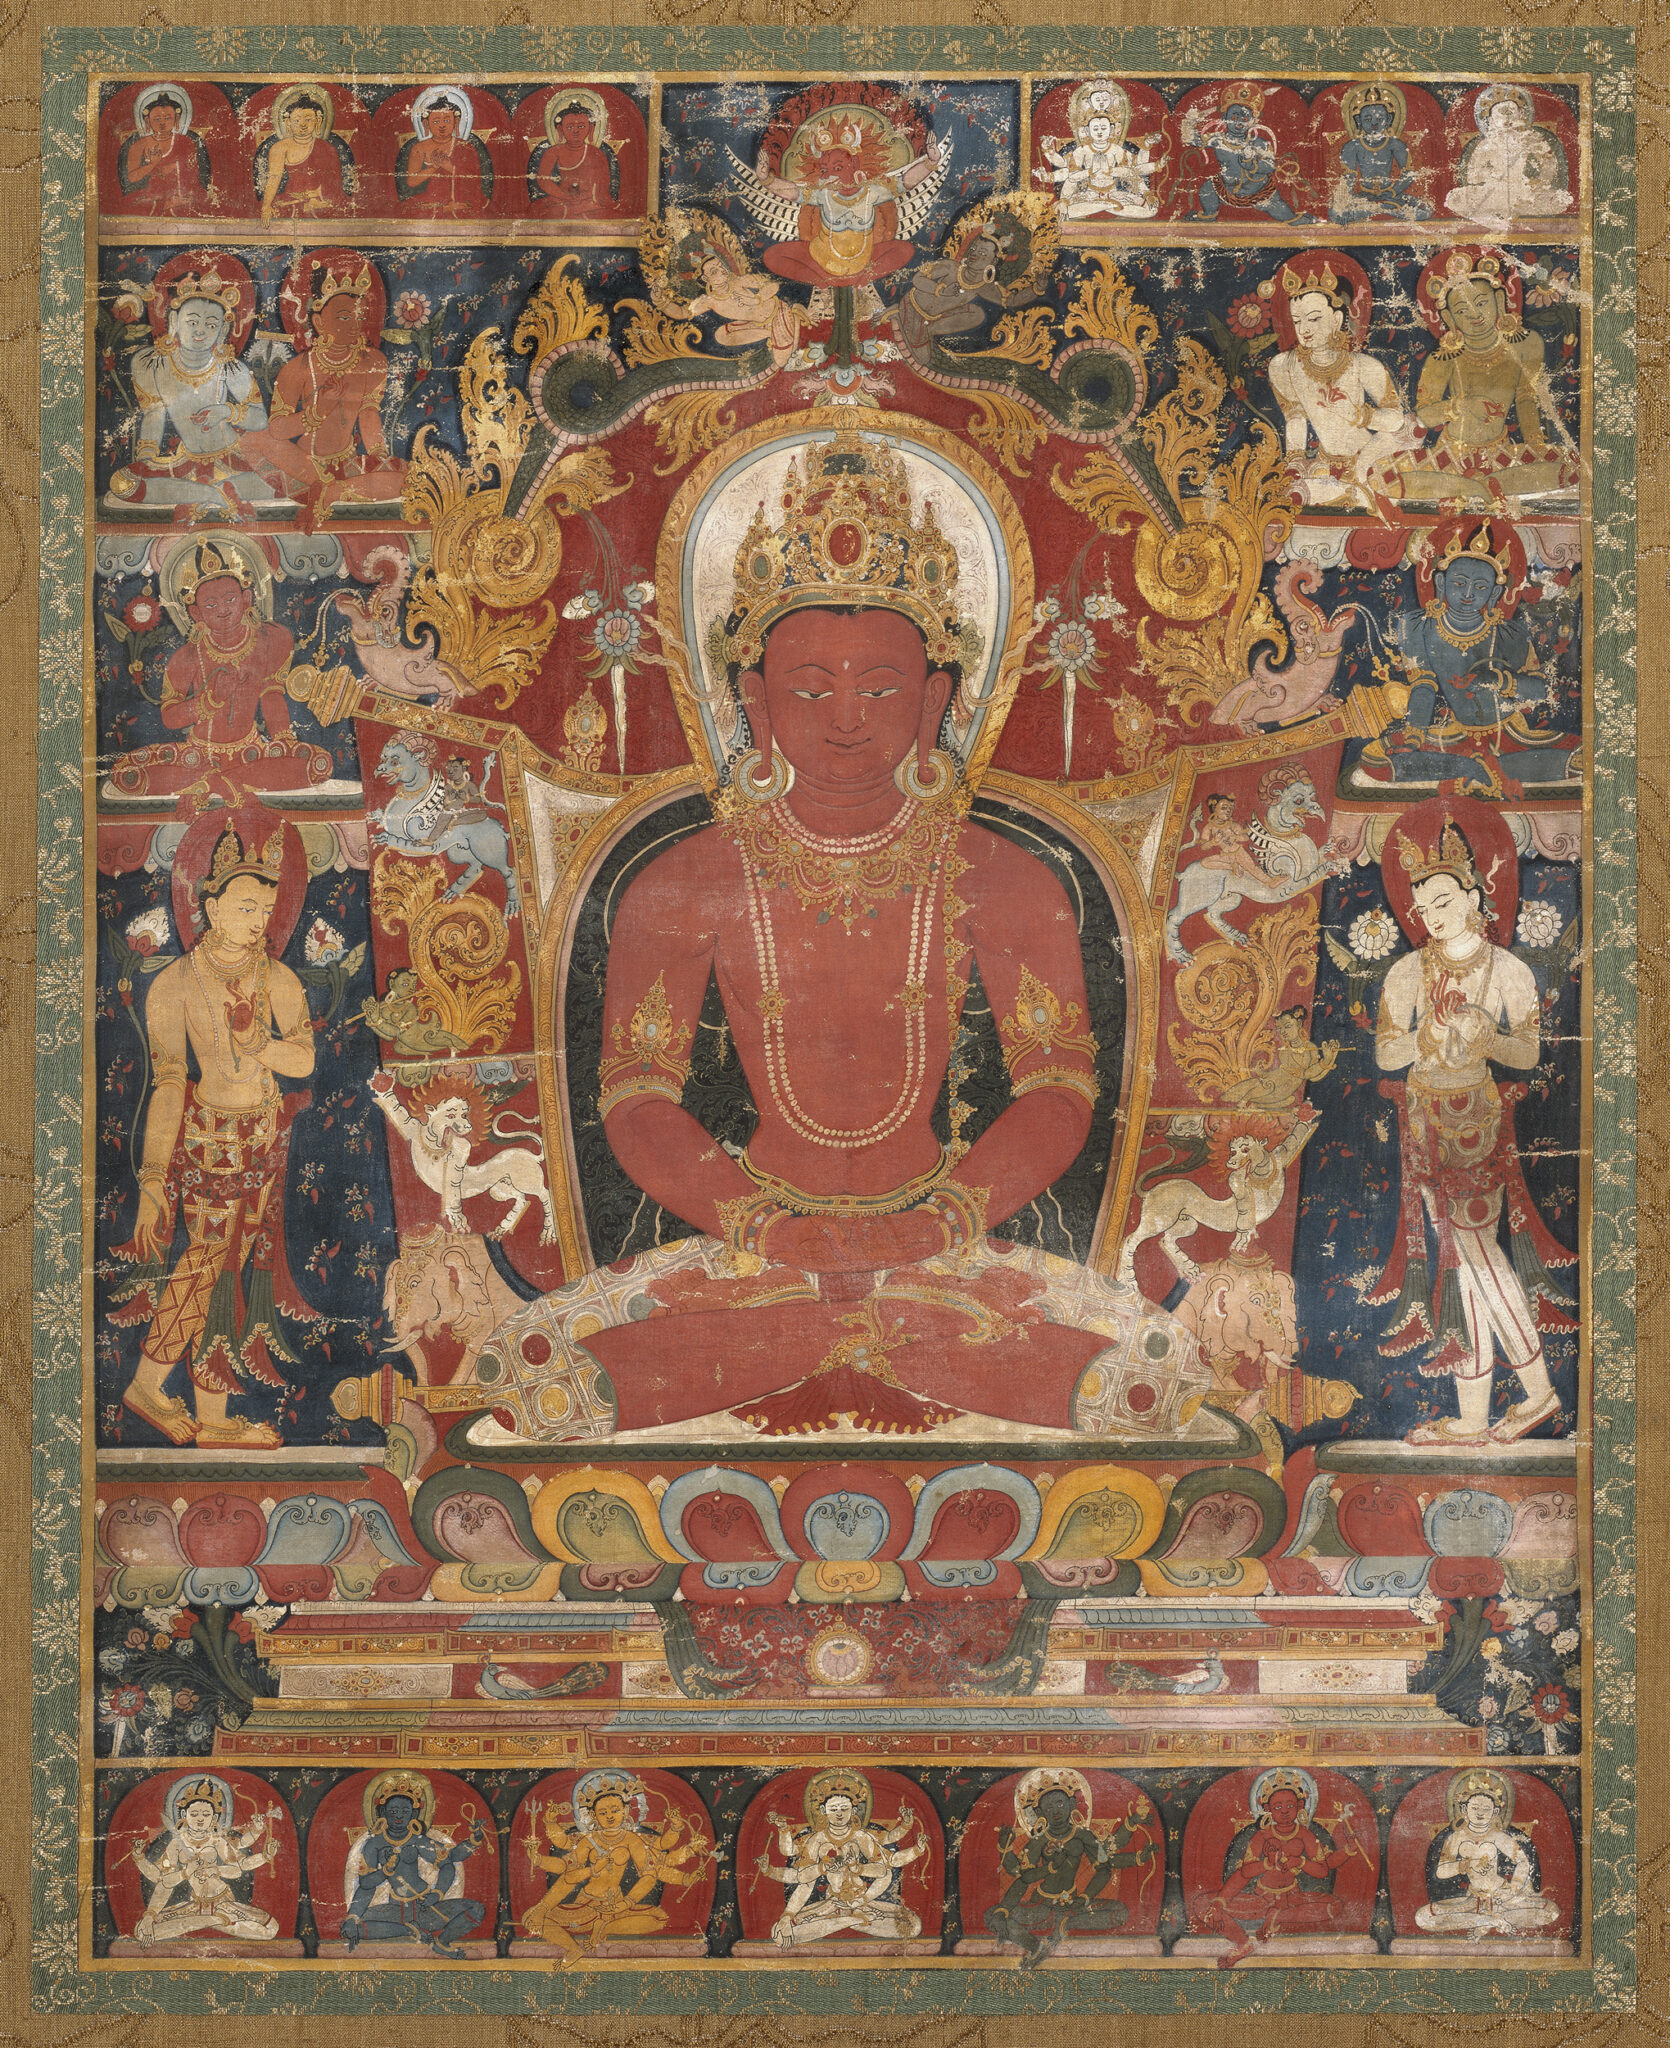 Crowned Buddha seated on lotus throne, surrounded by attendants and deities arranged in registers